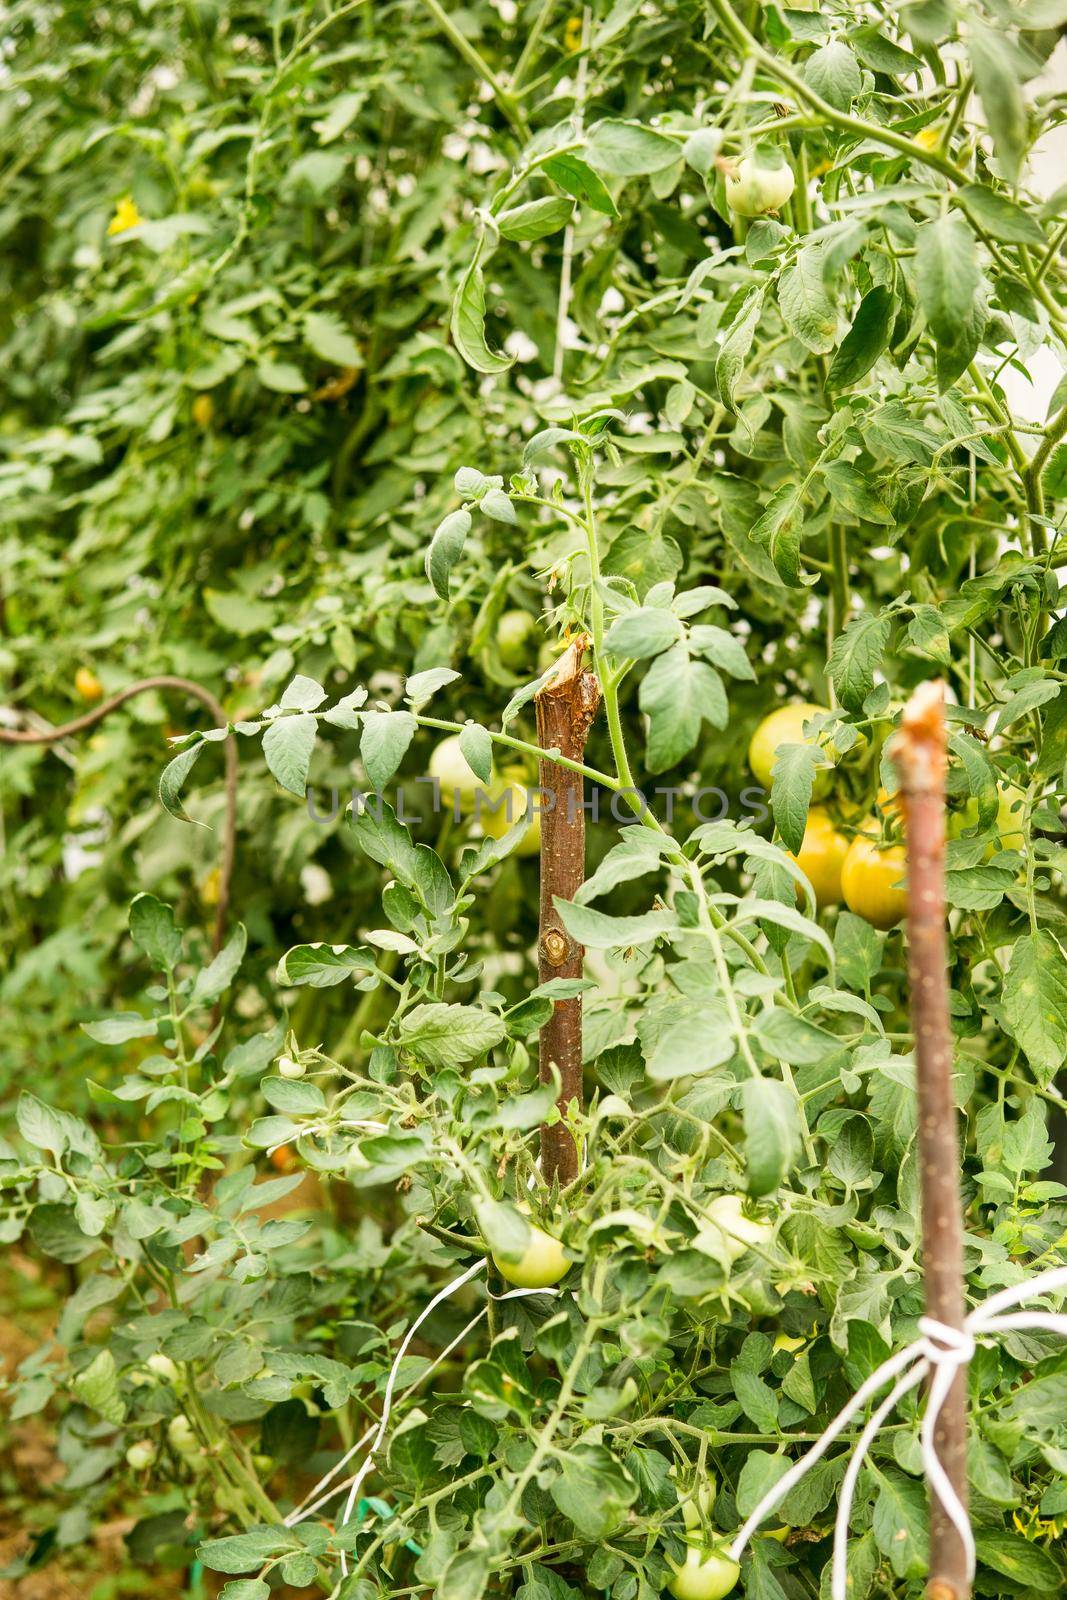 Tomatoes are hanging on a branch in the greenhouse. The concept of gardening and life in the country.